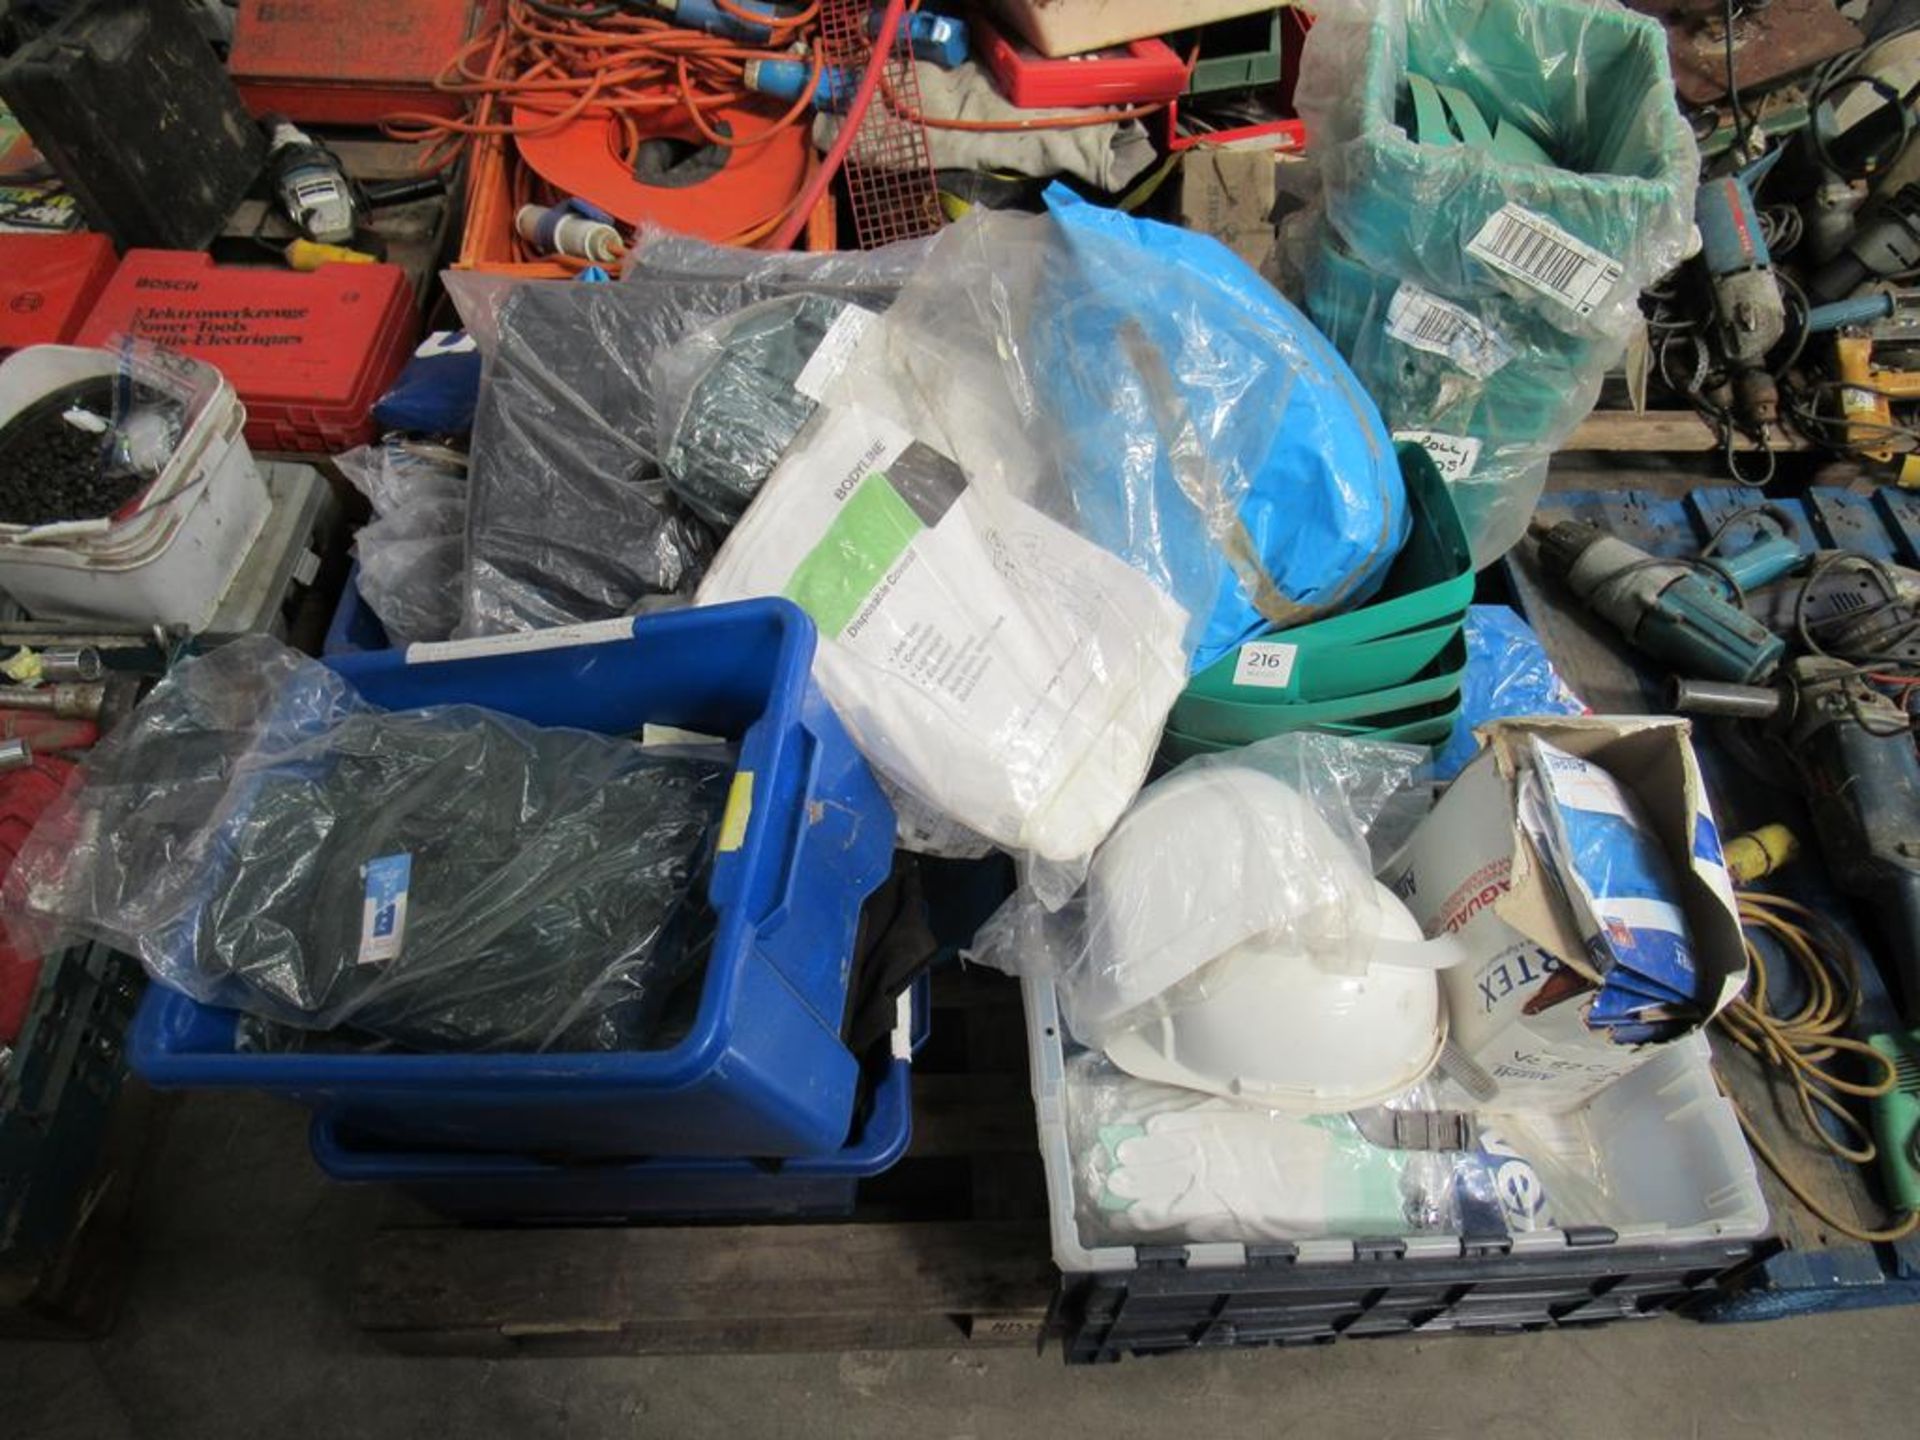 Pallet of PPE including hard hats, coverals, sweatshirts, gloves etc.